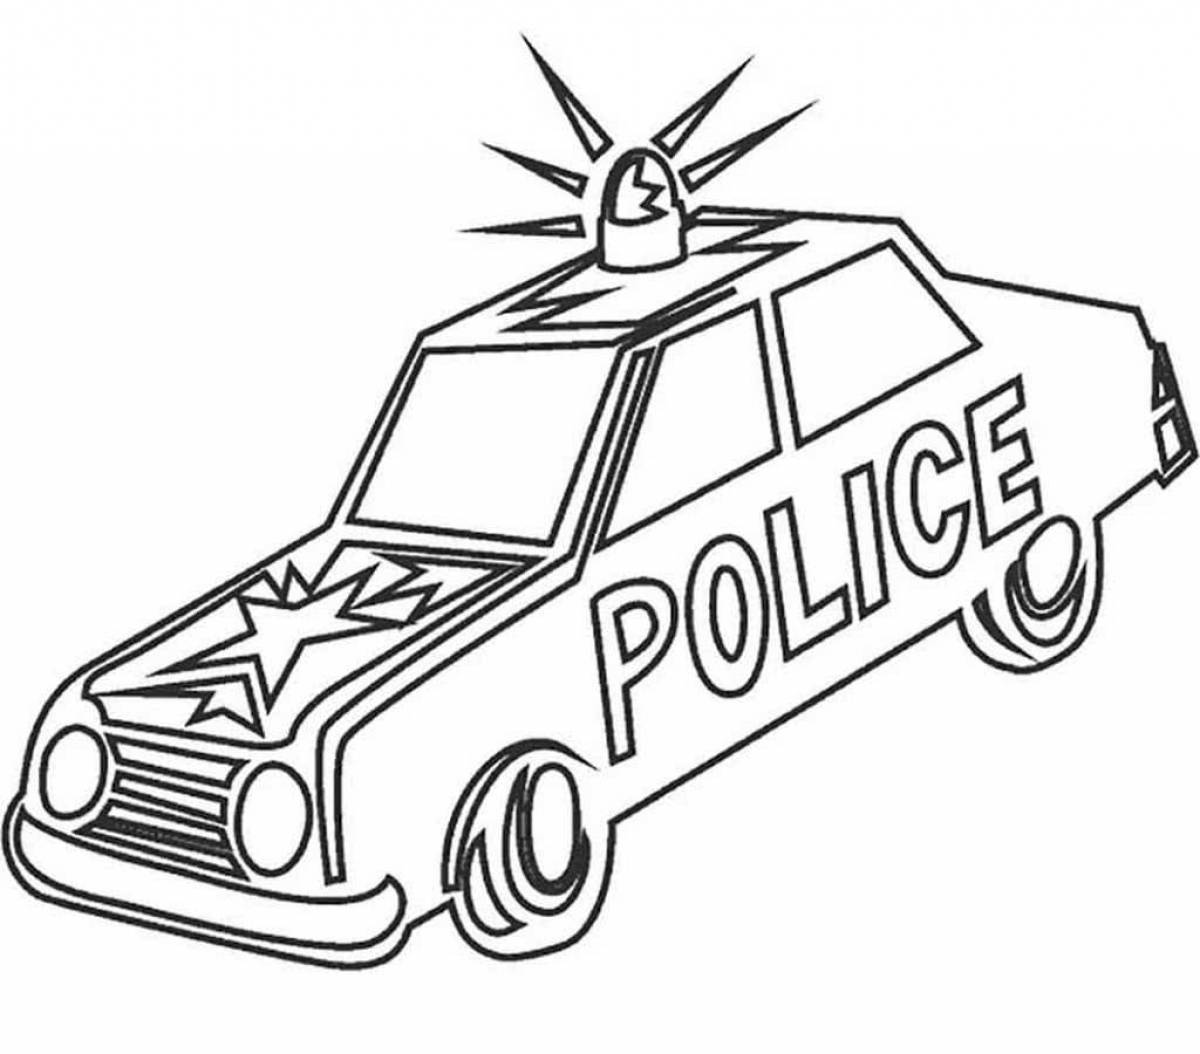 An entertaining police coloring book for kids